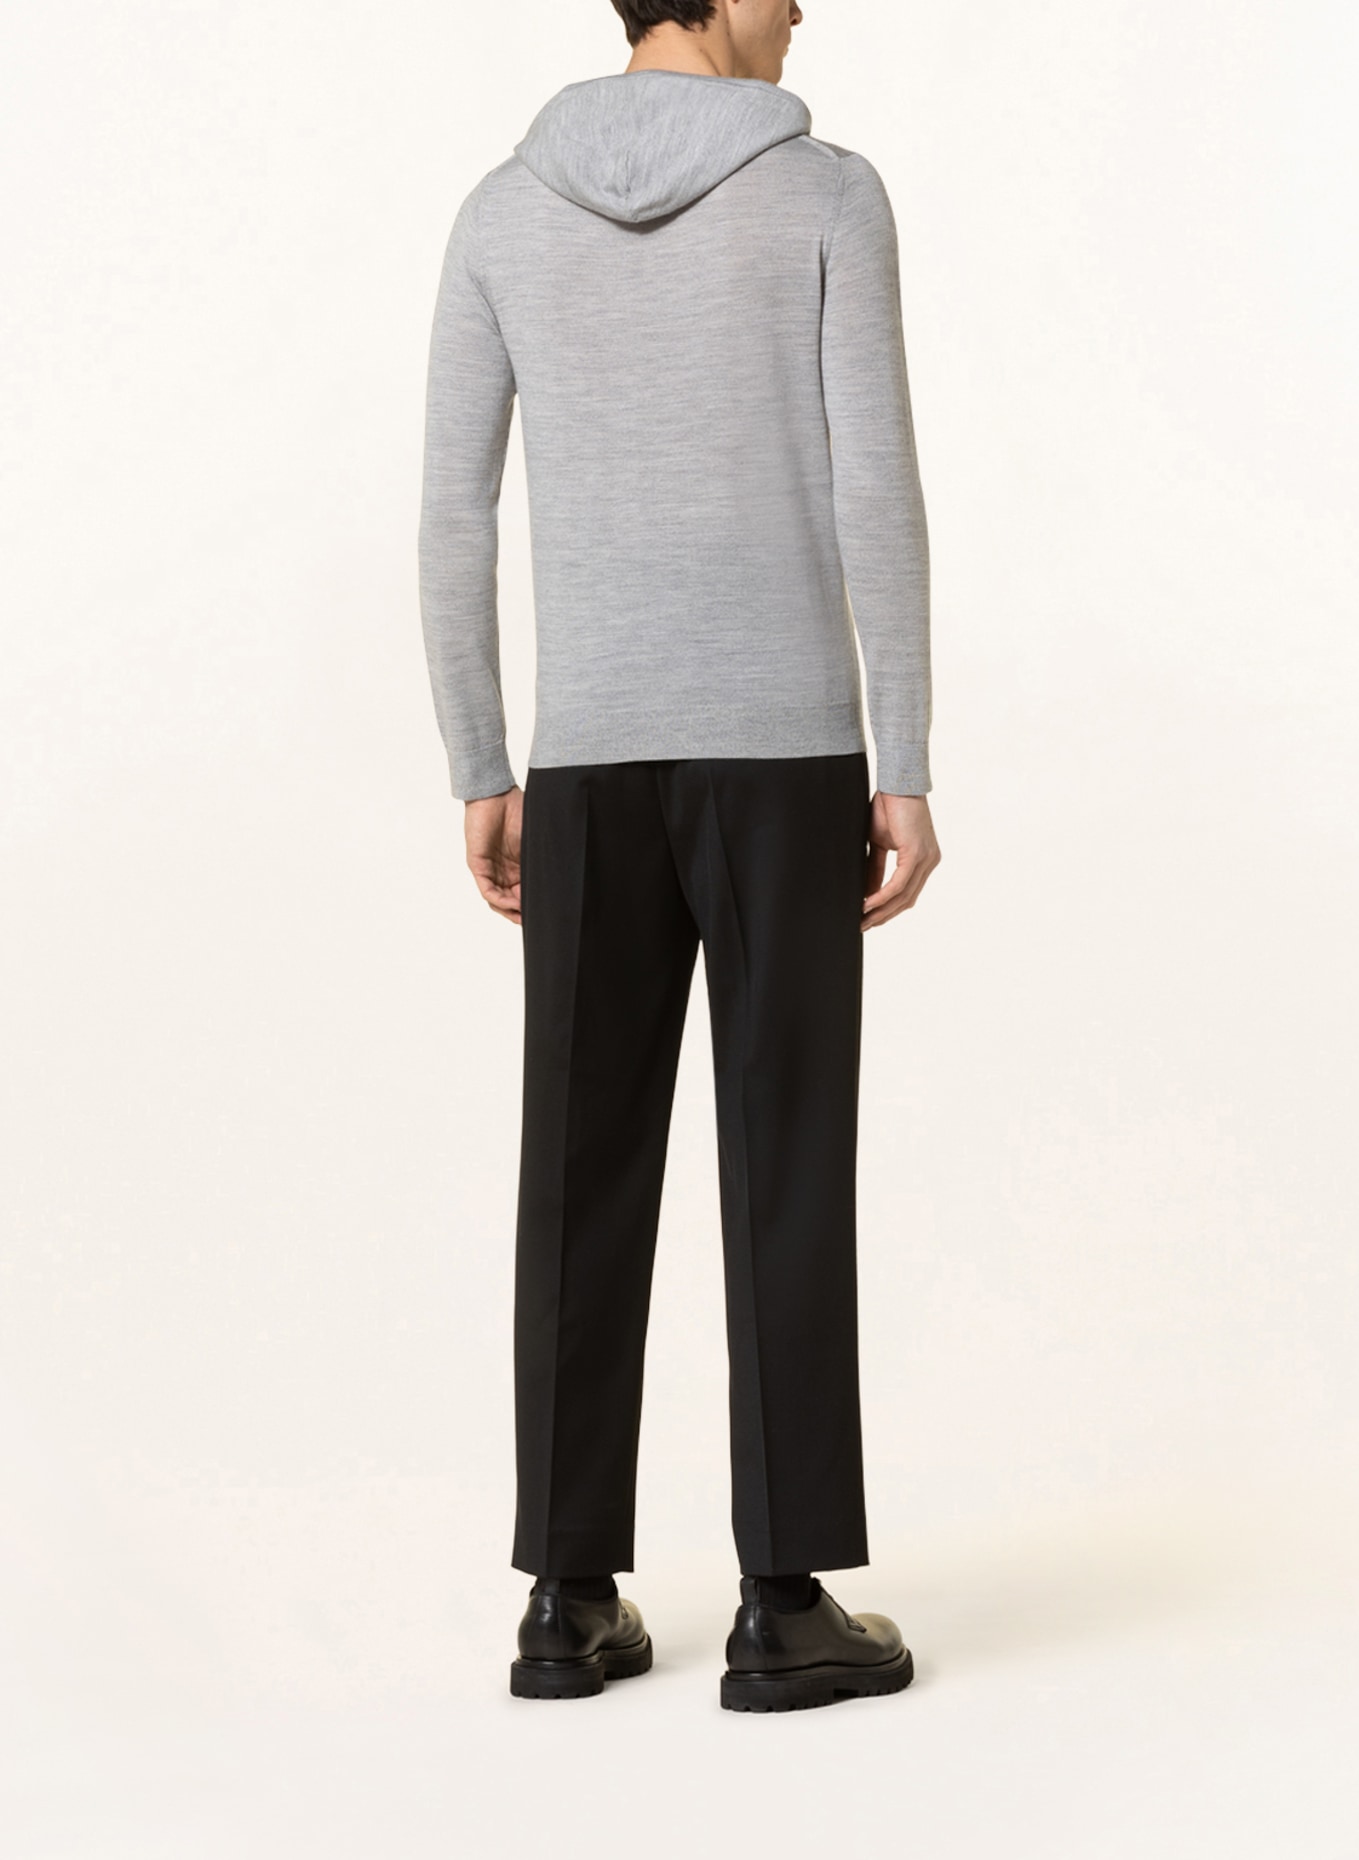 REISS Knit hoodie HOLLAND, Color: LIGHT GRAY (Image 3)